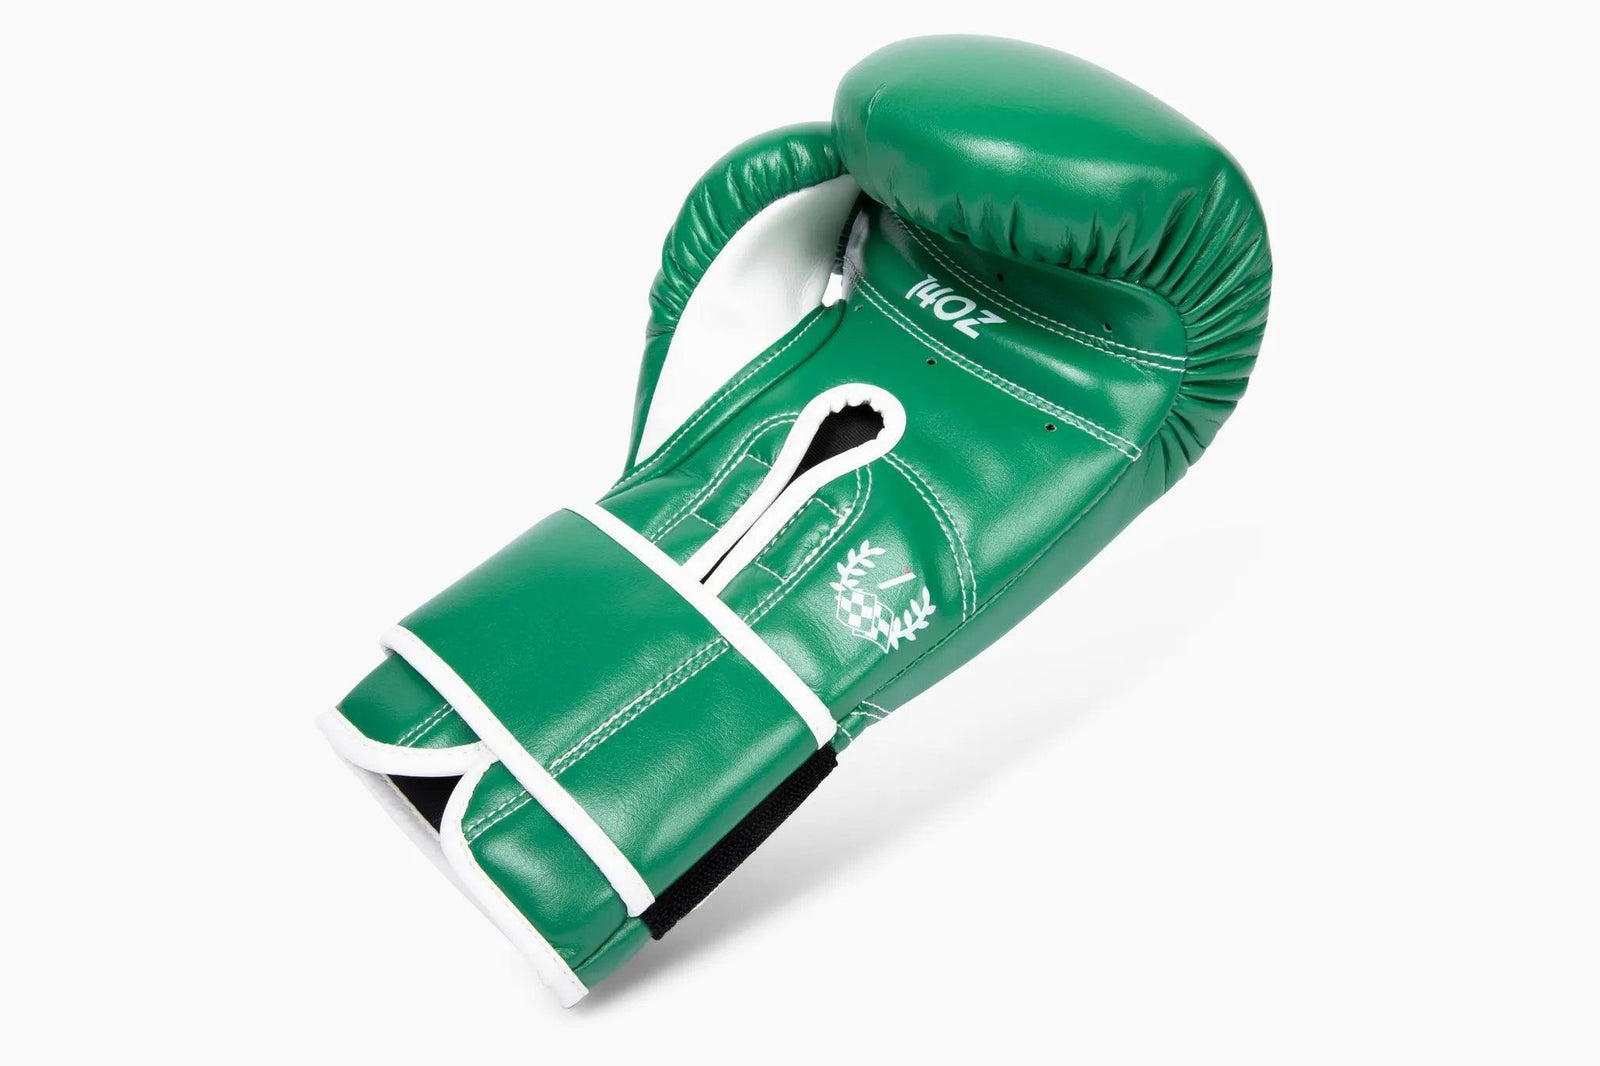 Detailed image of palm ventilation for MK1's Green Mark 1 Boxing Training Gloves.